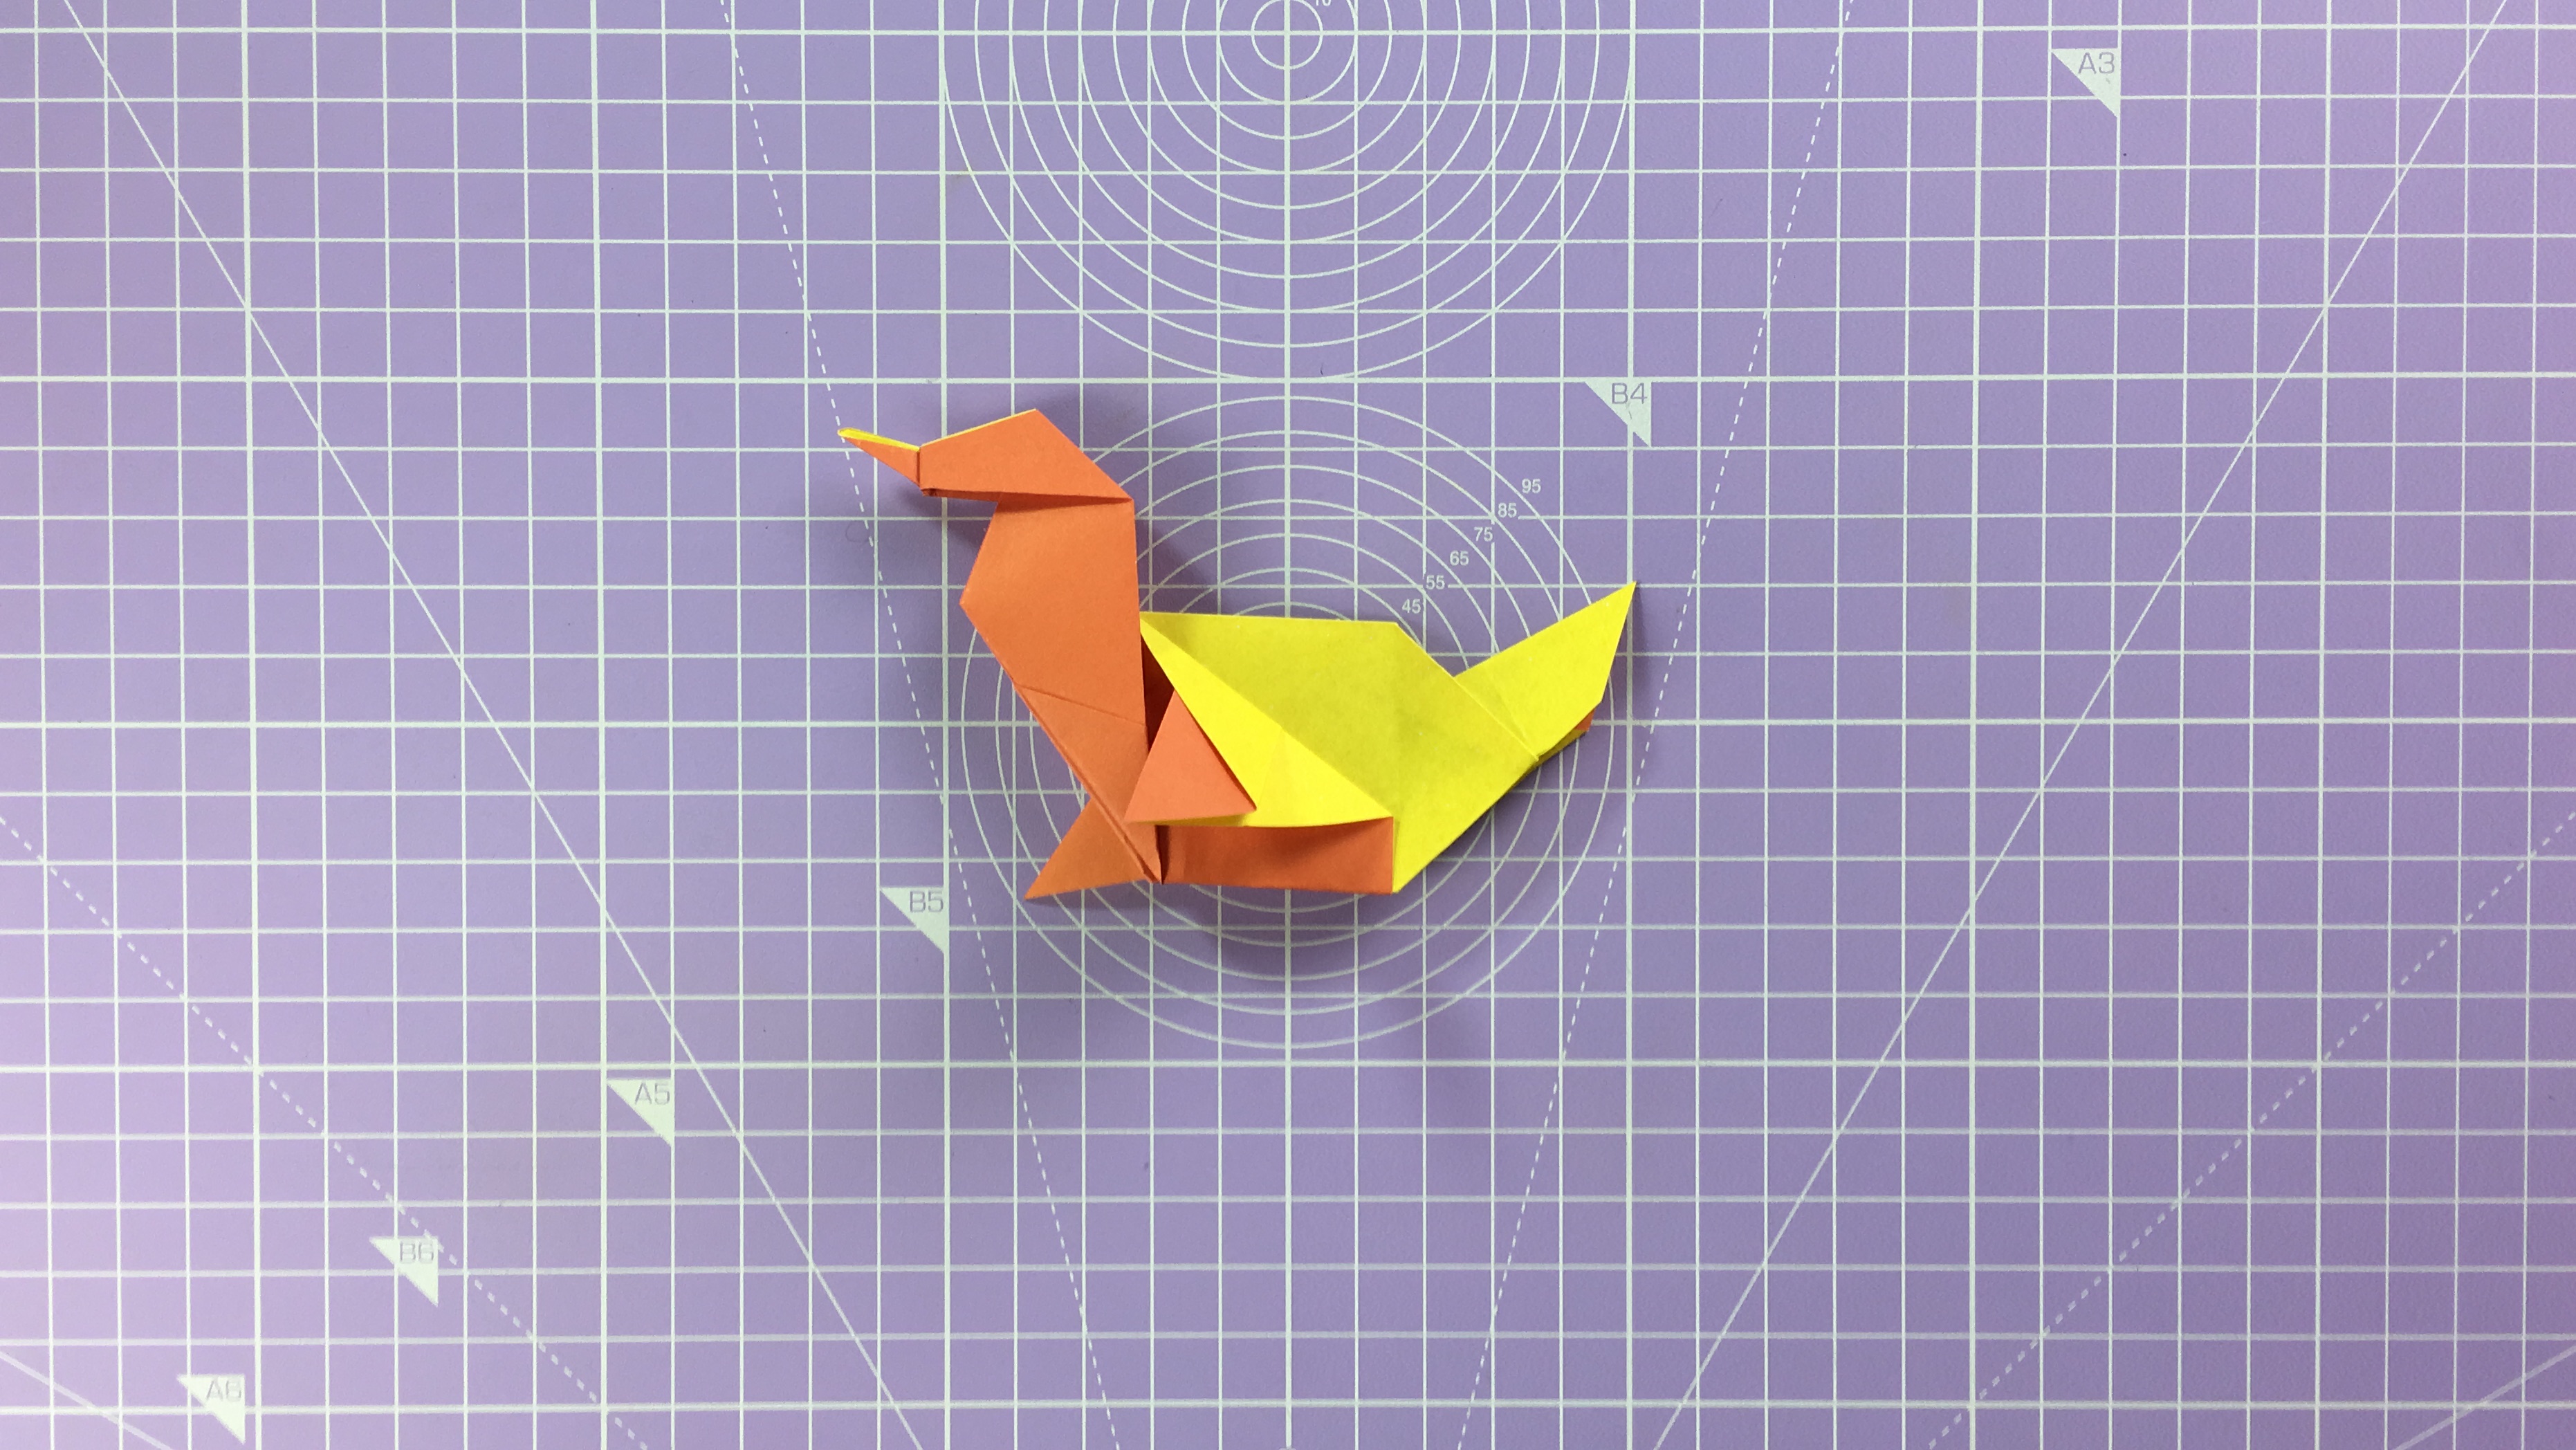 How to make an origami duck - step 22b